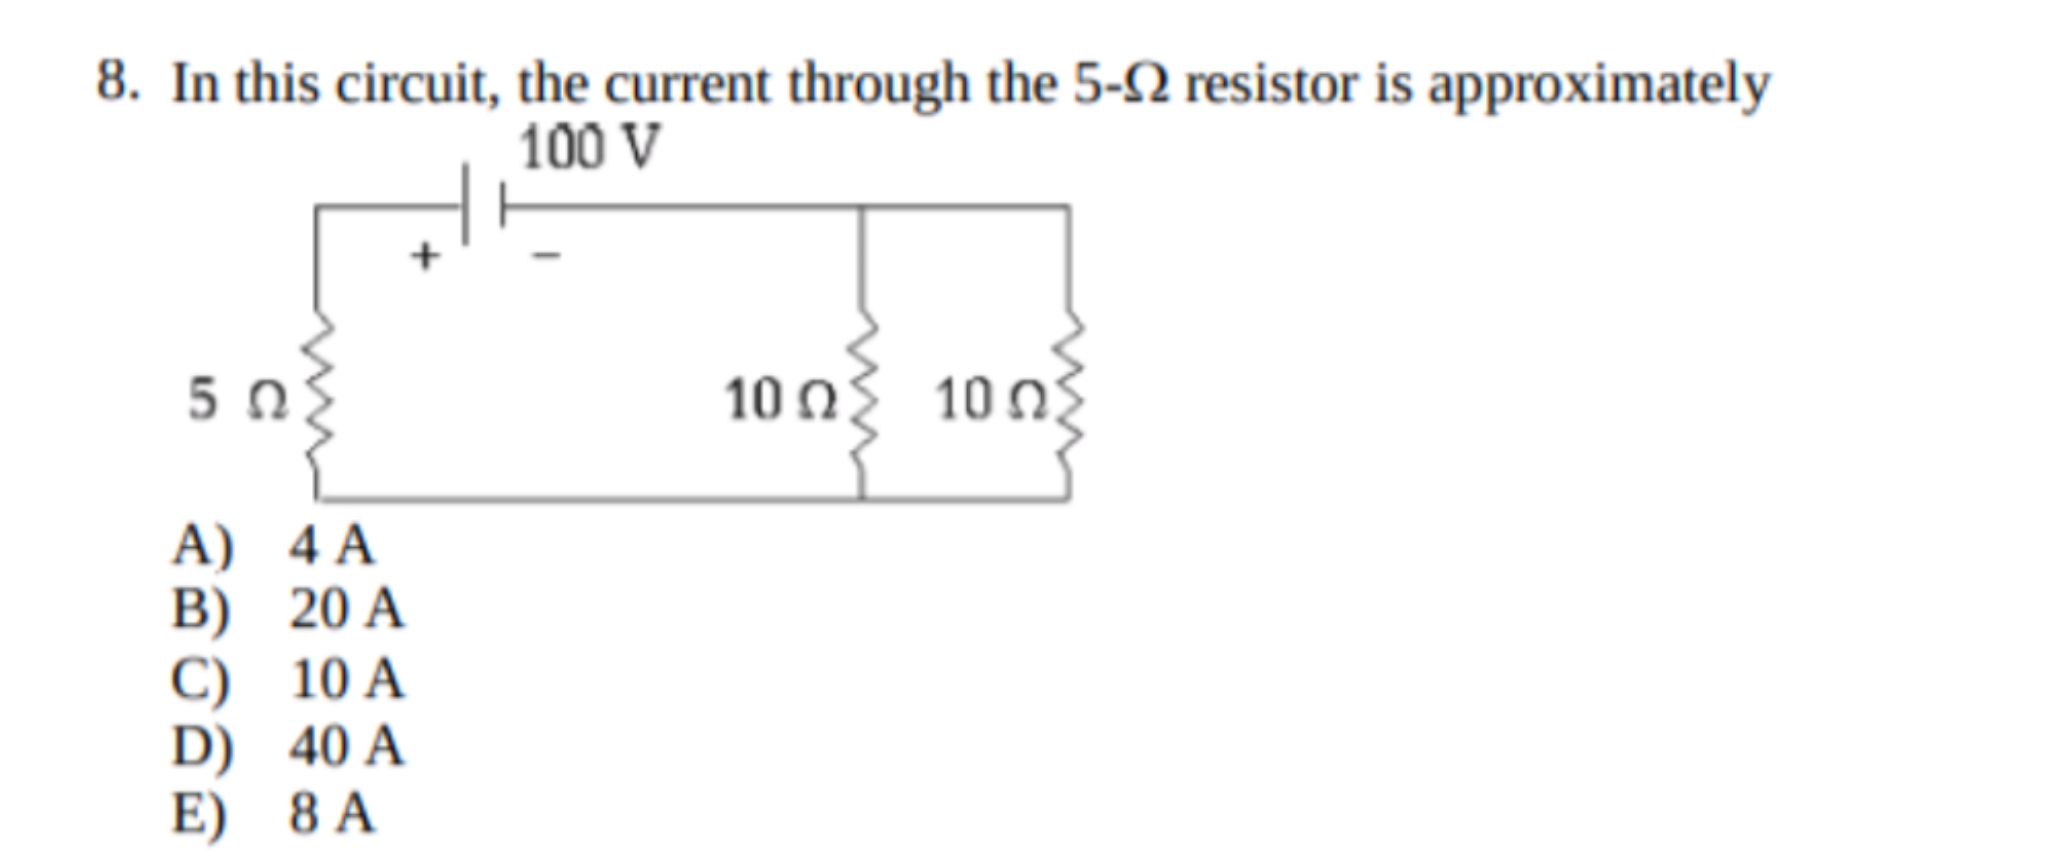 8. In this circuit, the current through the 5-2 resistor is approximately
100 V
10Ω 10Ω
A) 4 A
B) 20 A
C) 10 A
D) 40 A
E) 8 A
